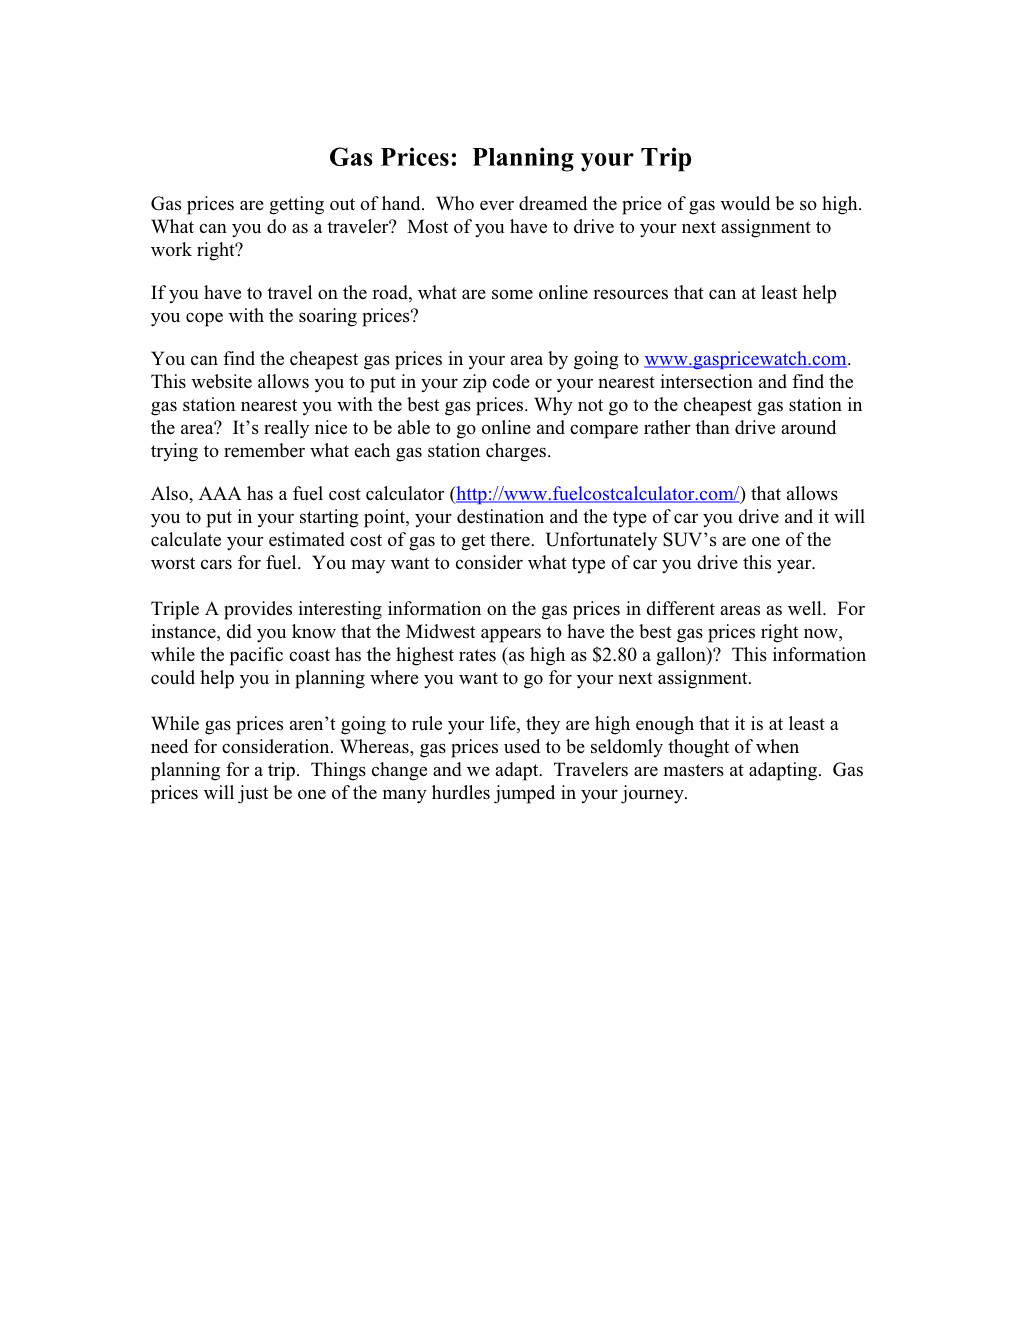 Gas Prices: Planning Your Trip